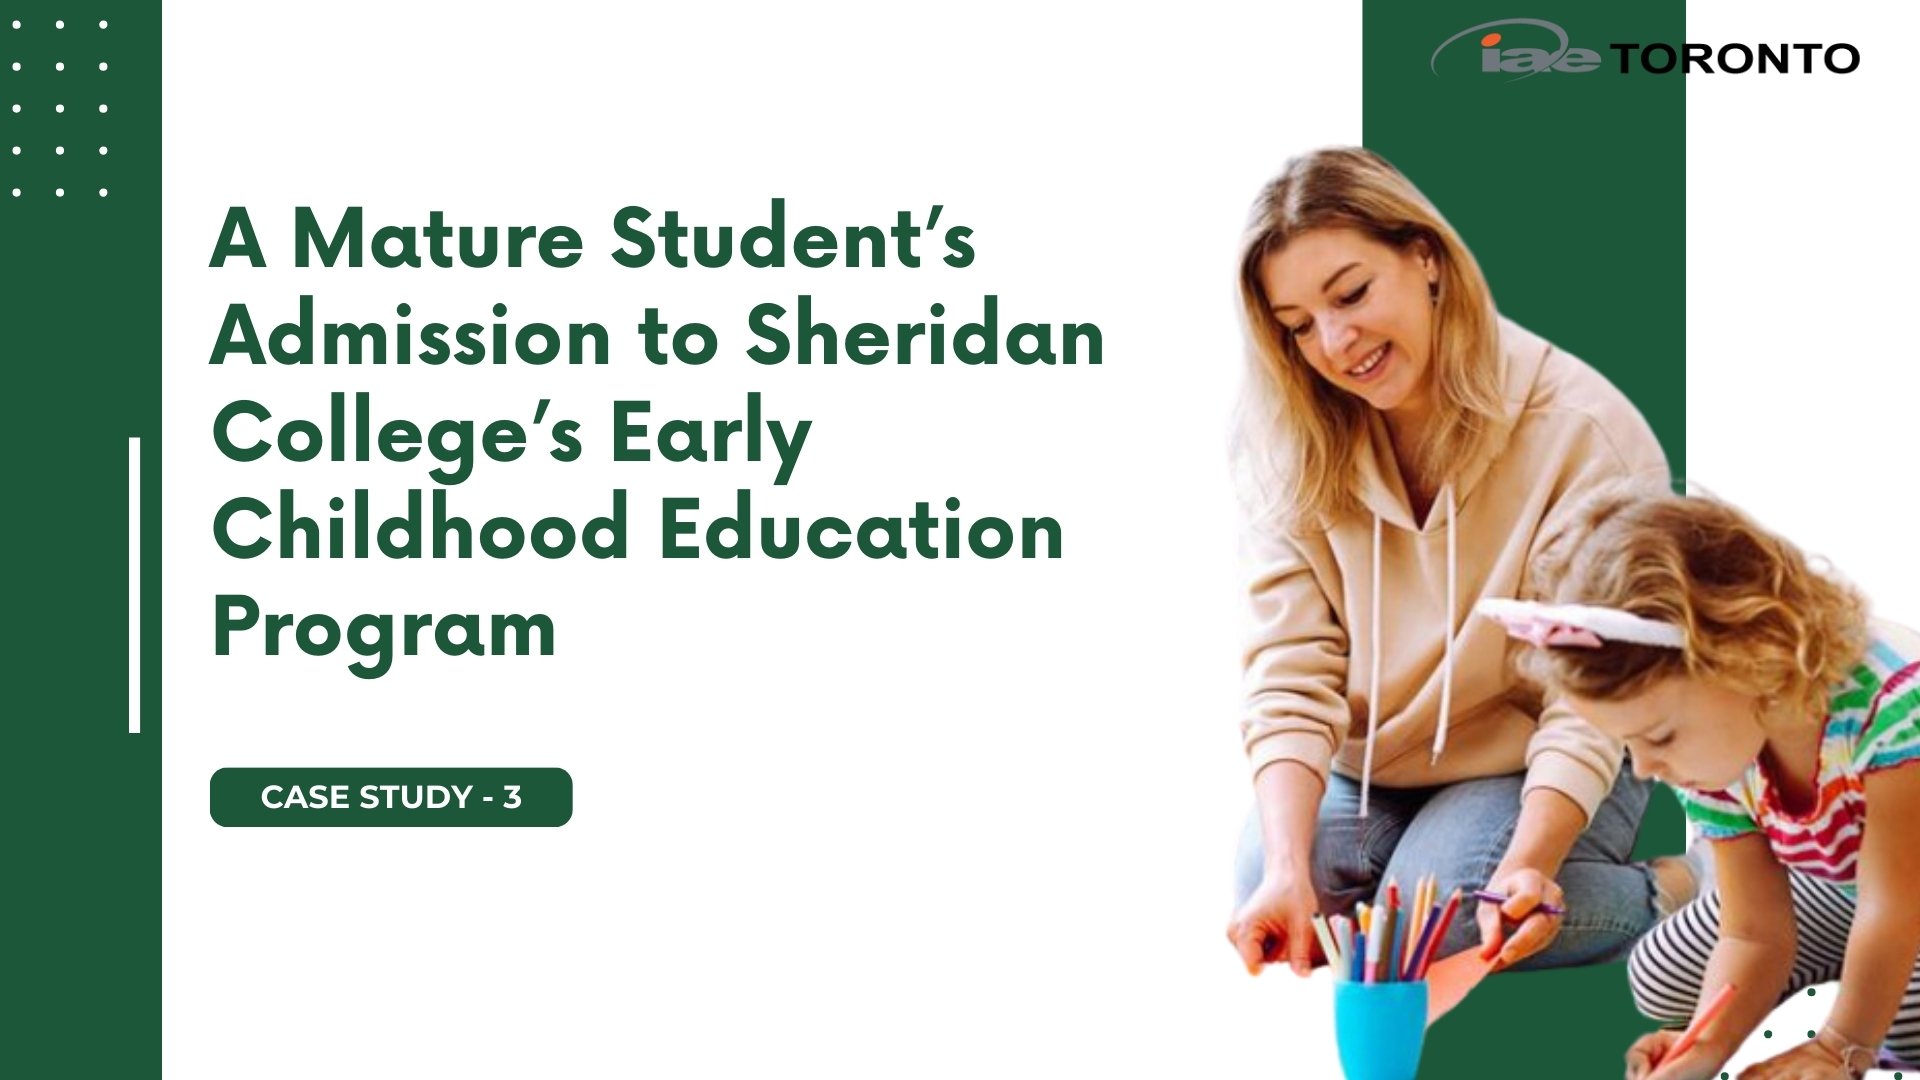 A Mature Student’s Admission to Sheridan College’s Early Childhood Education Program